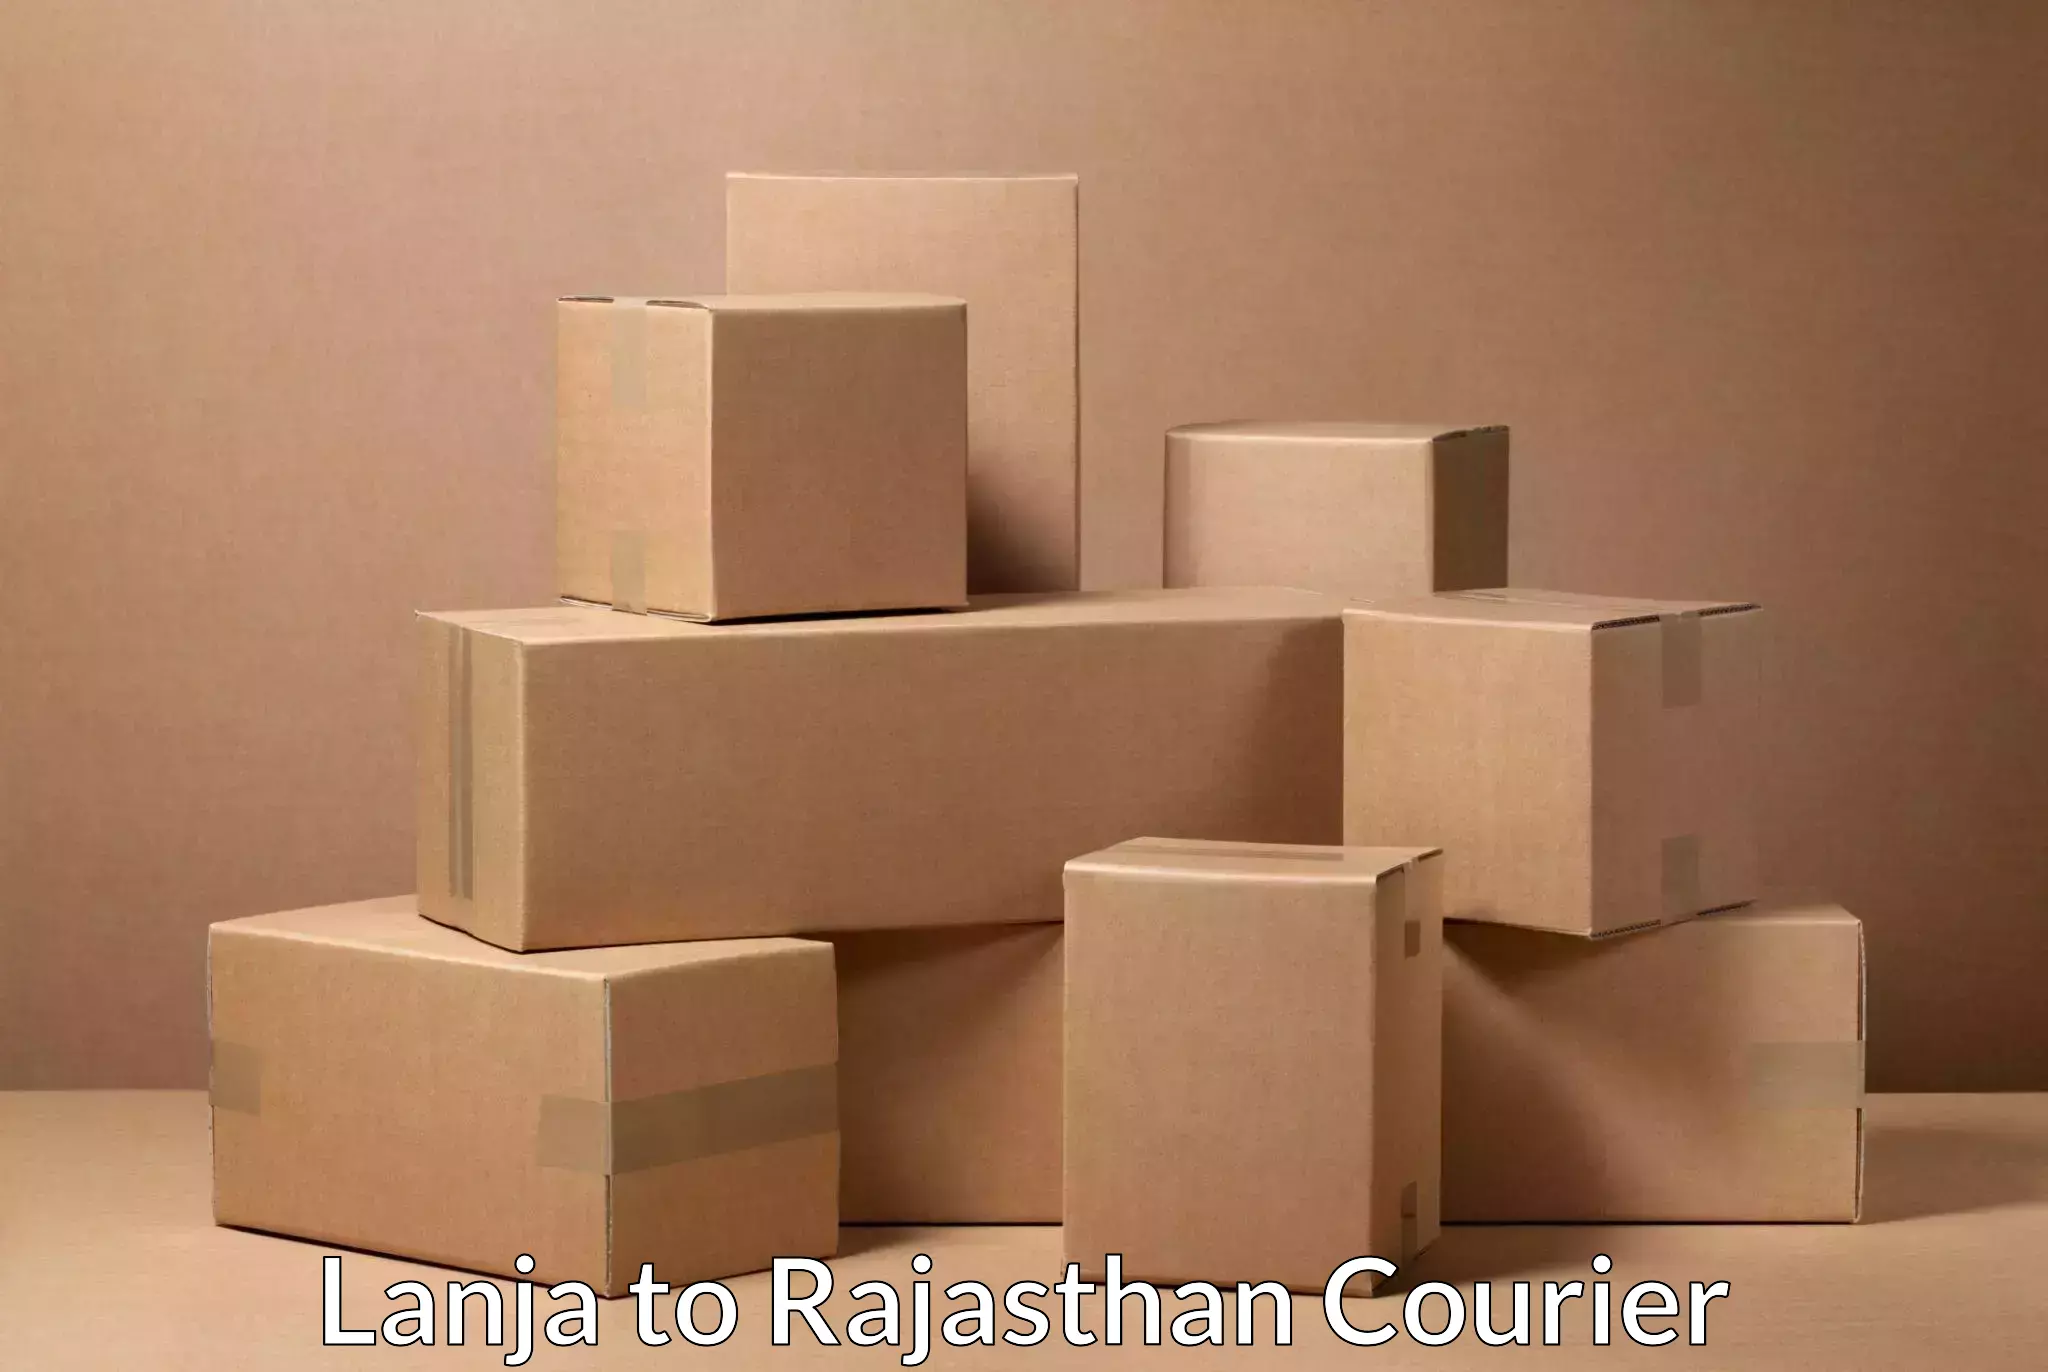 State-of-the-art courier technology Lanja to Mathania